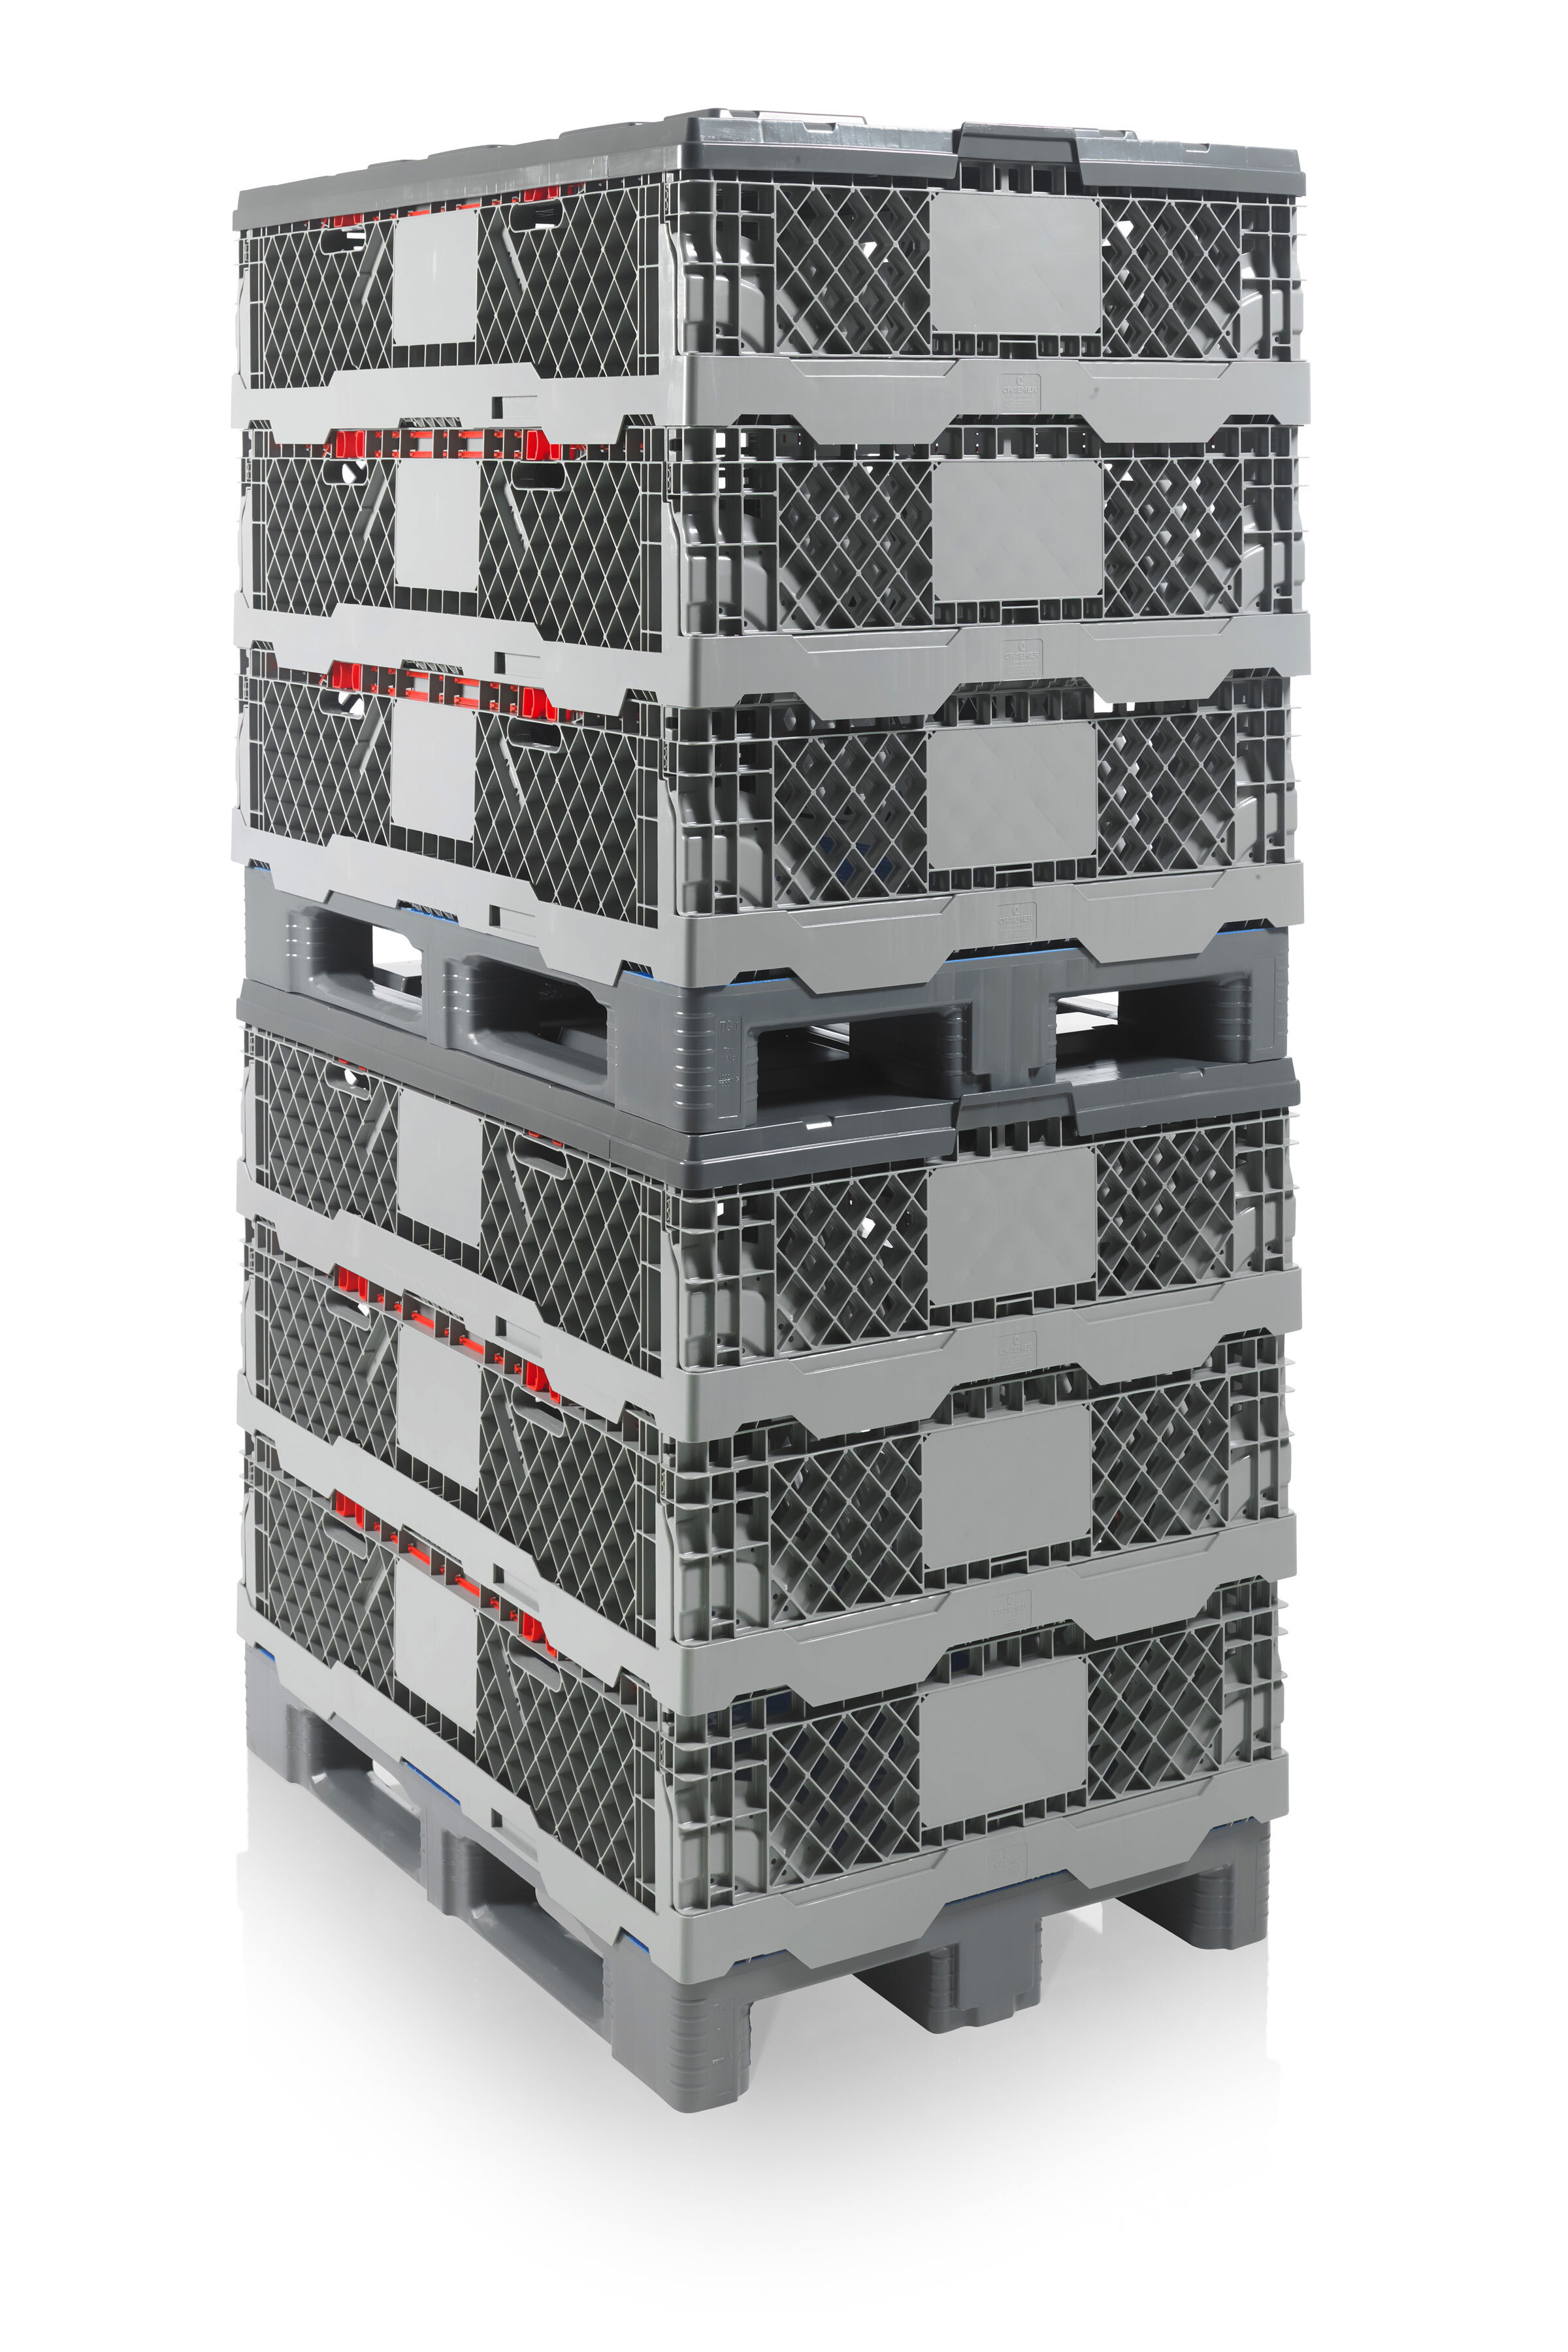 Added Value For Logistics: The Euro Pallet Collar CC1 From Craemer